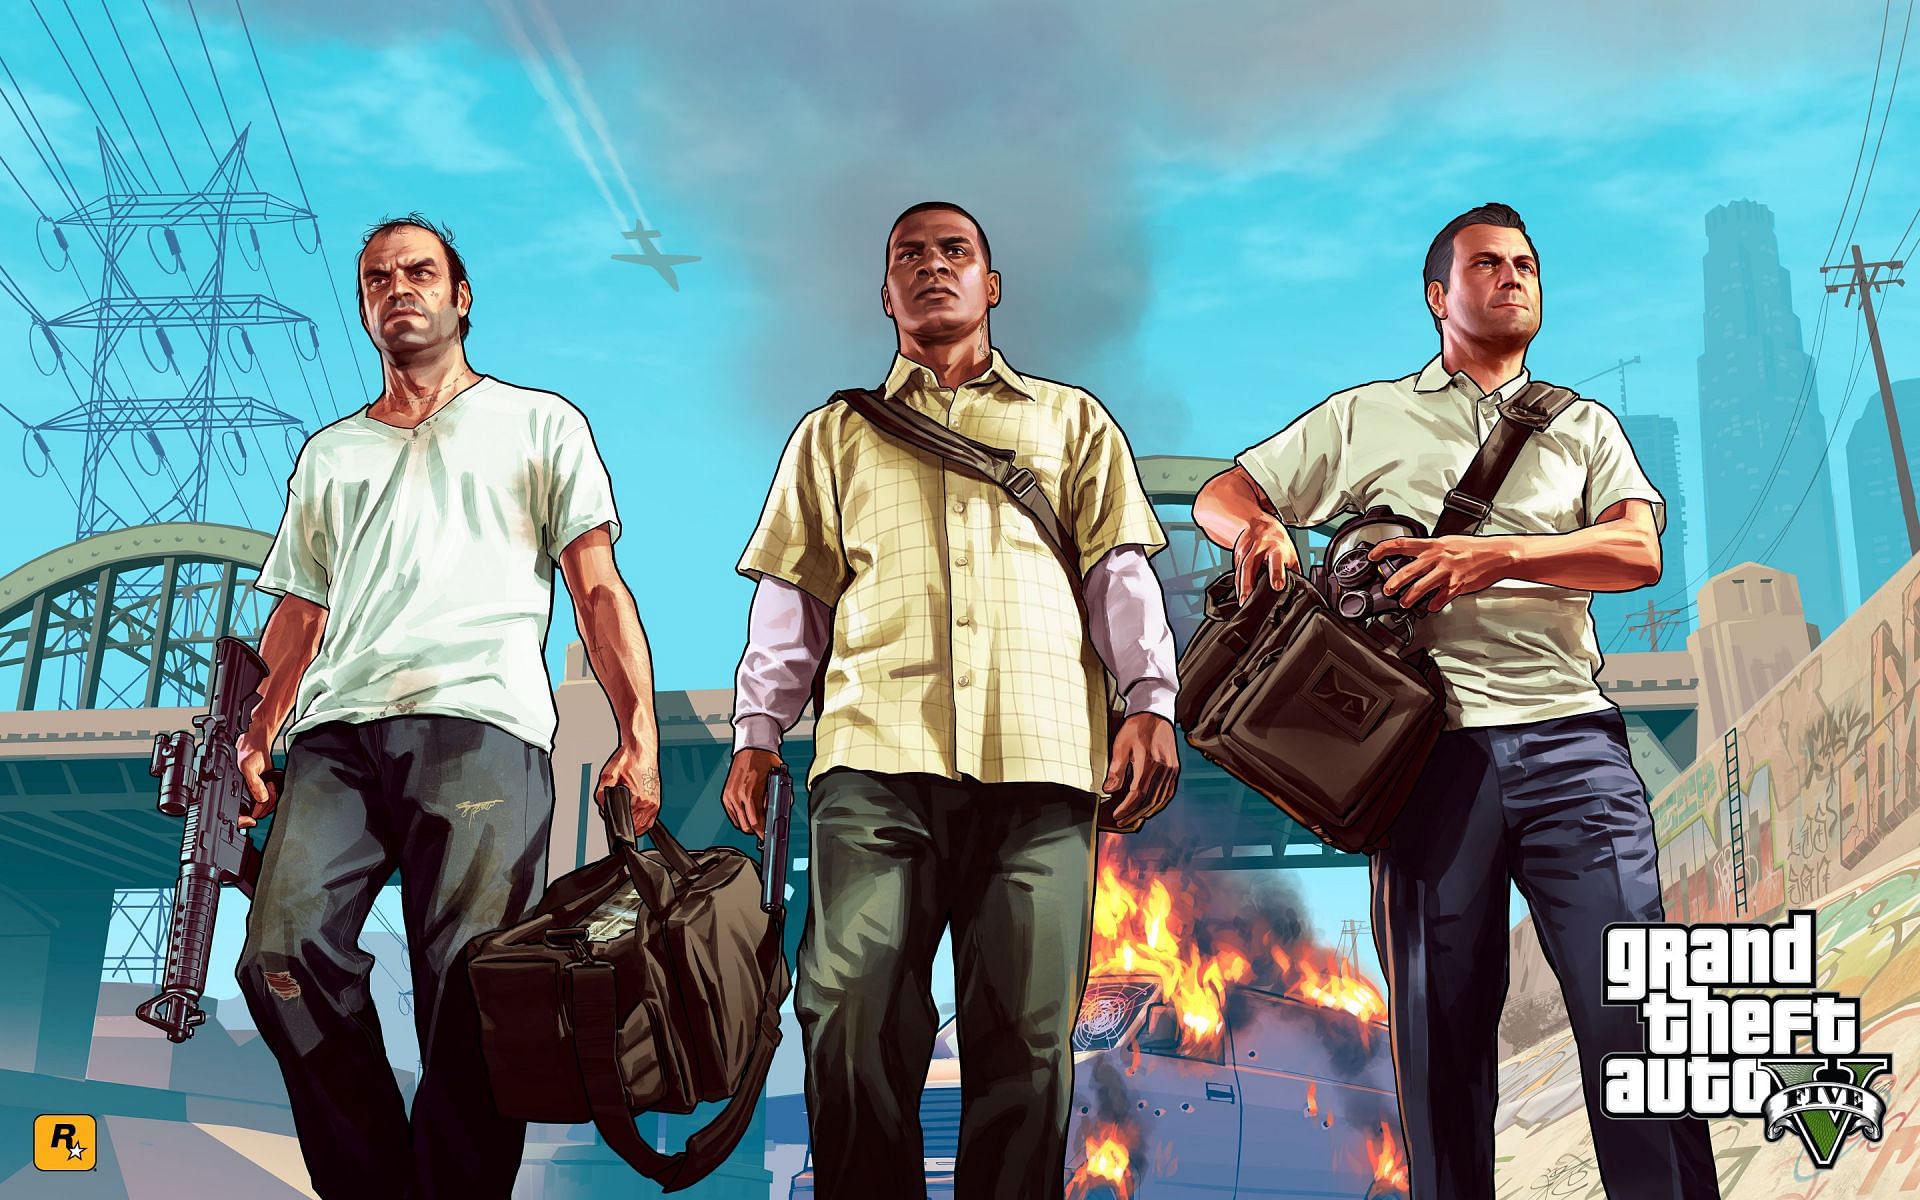 5 of the most fun GTA 5 gameplay features worth reminiscing about